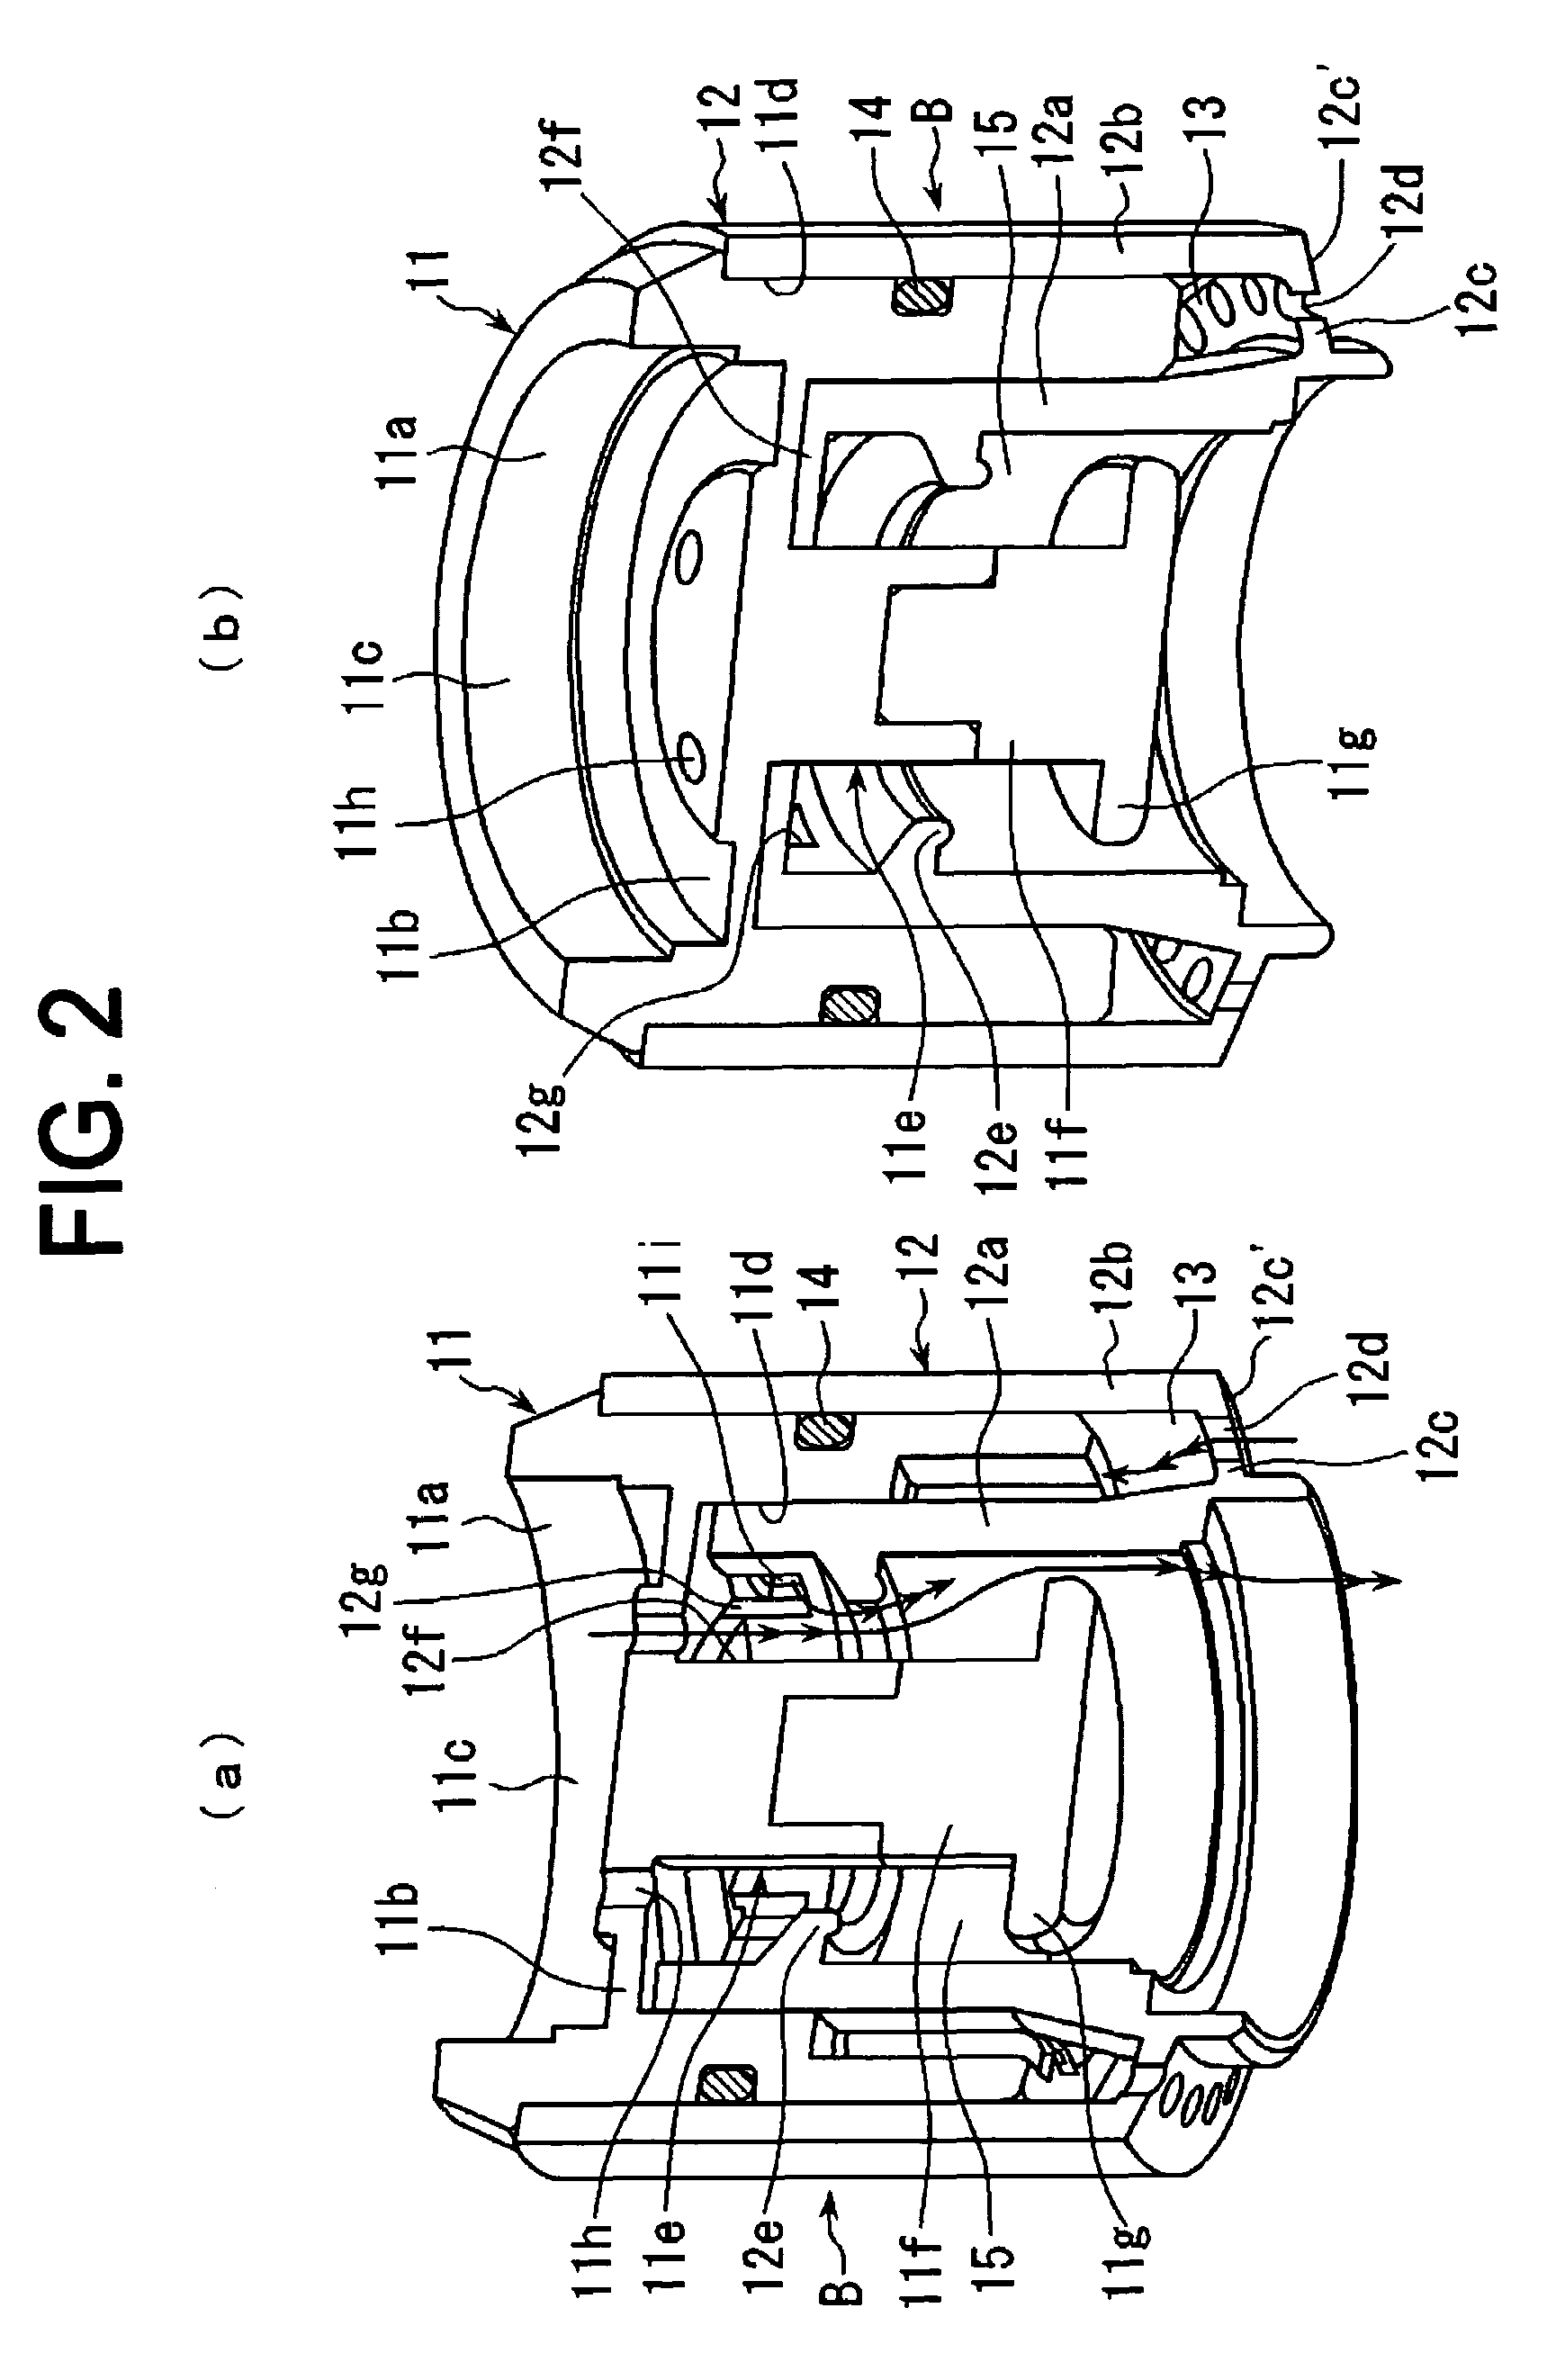 Water discharge switching device